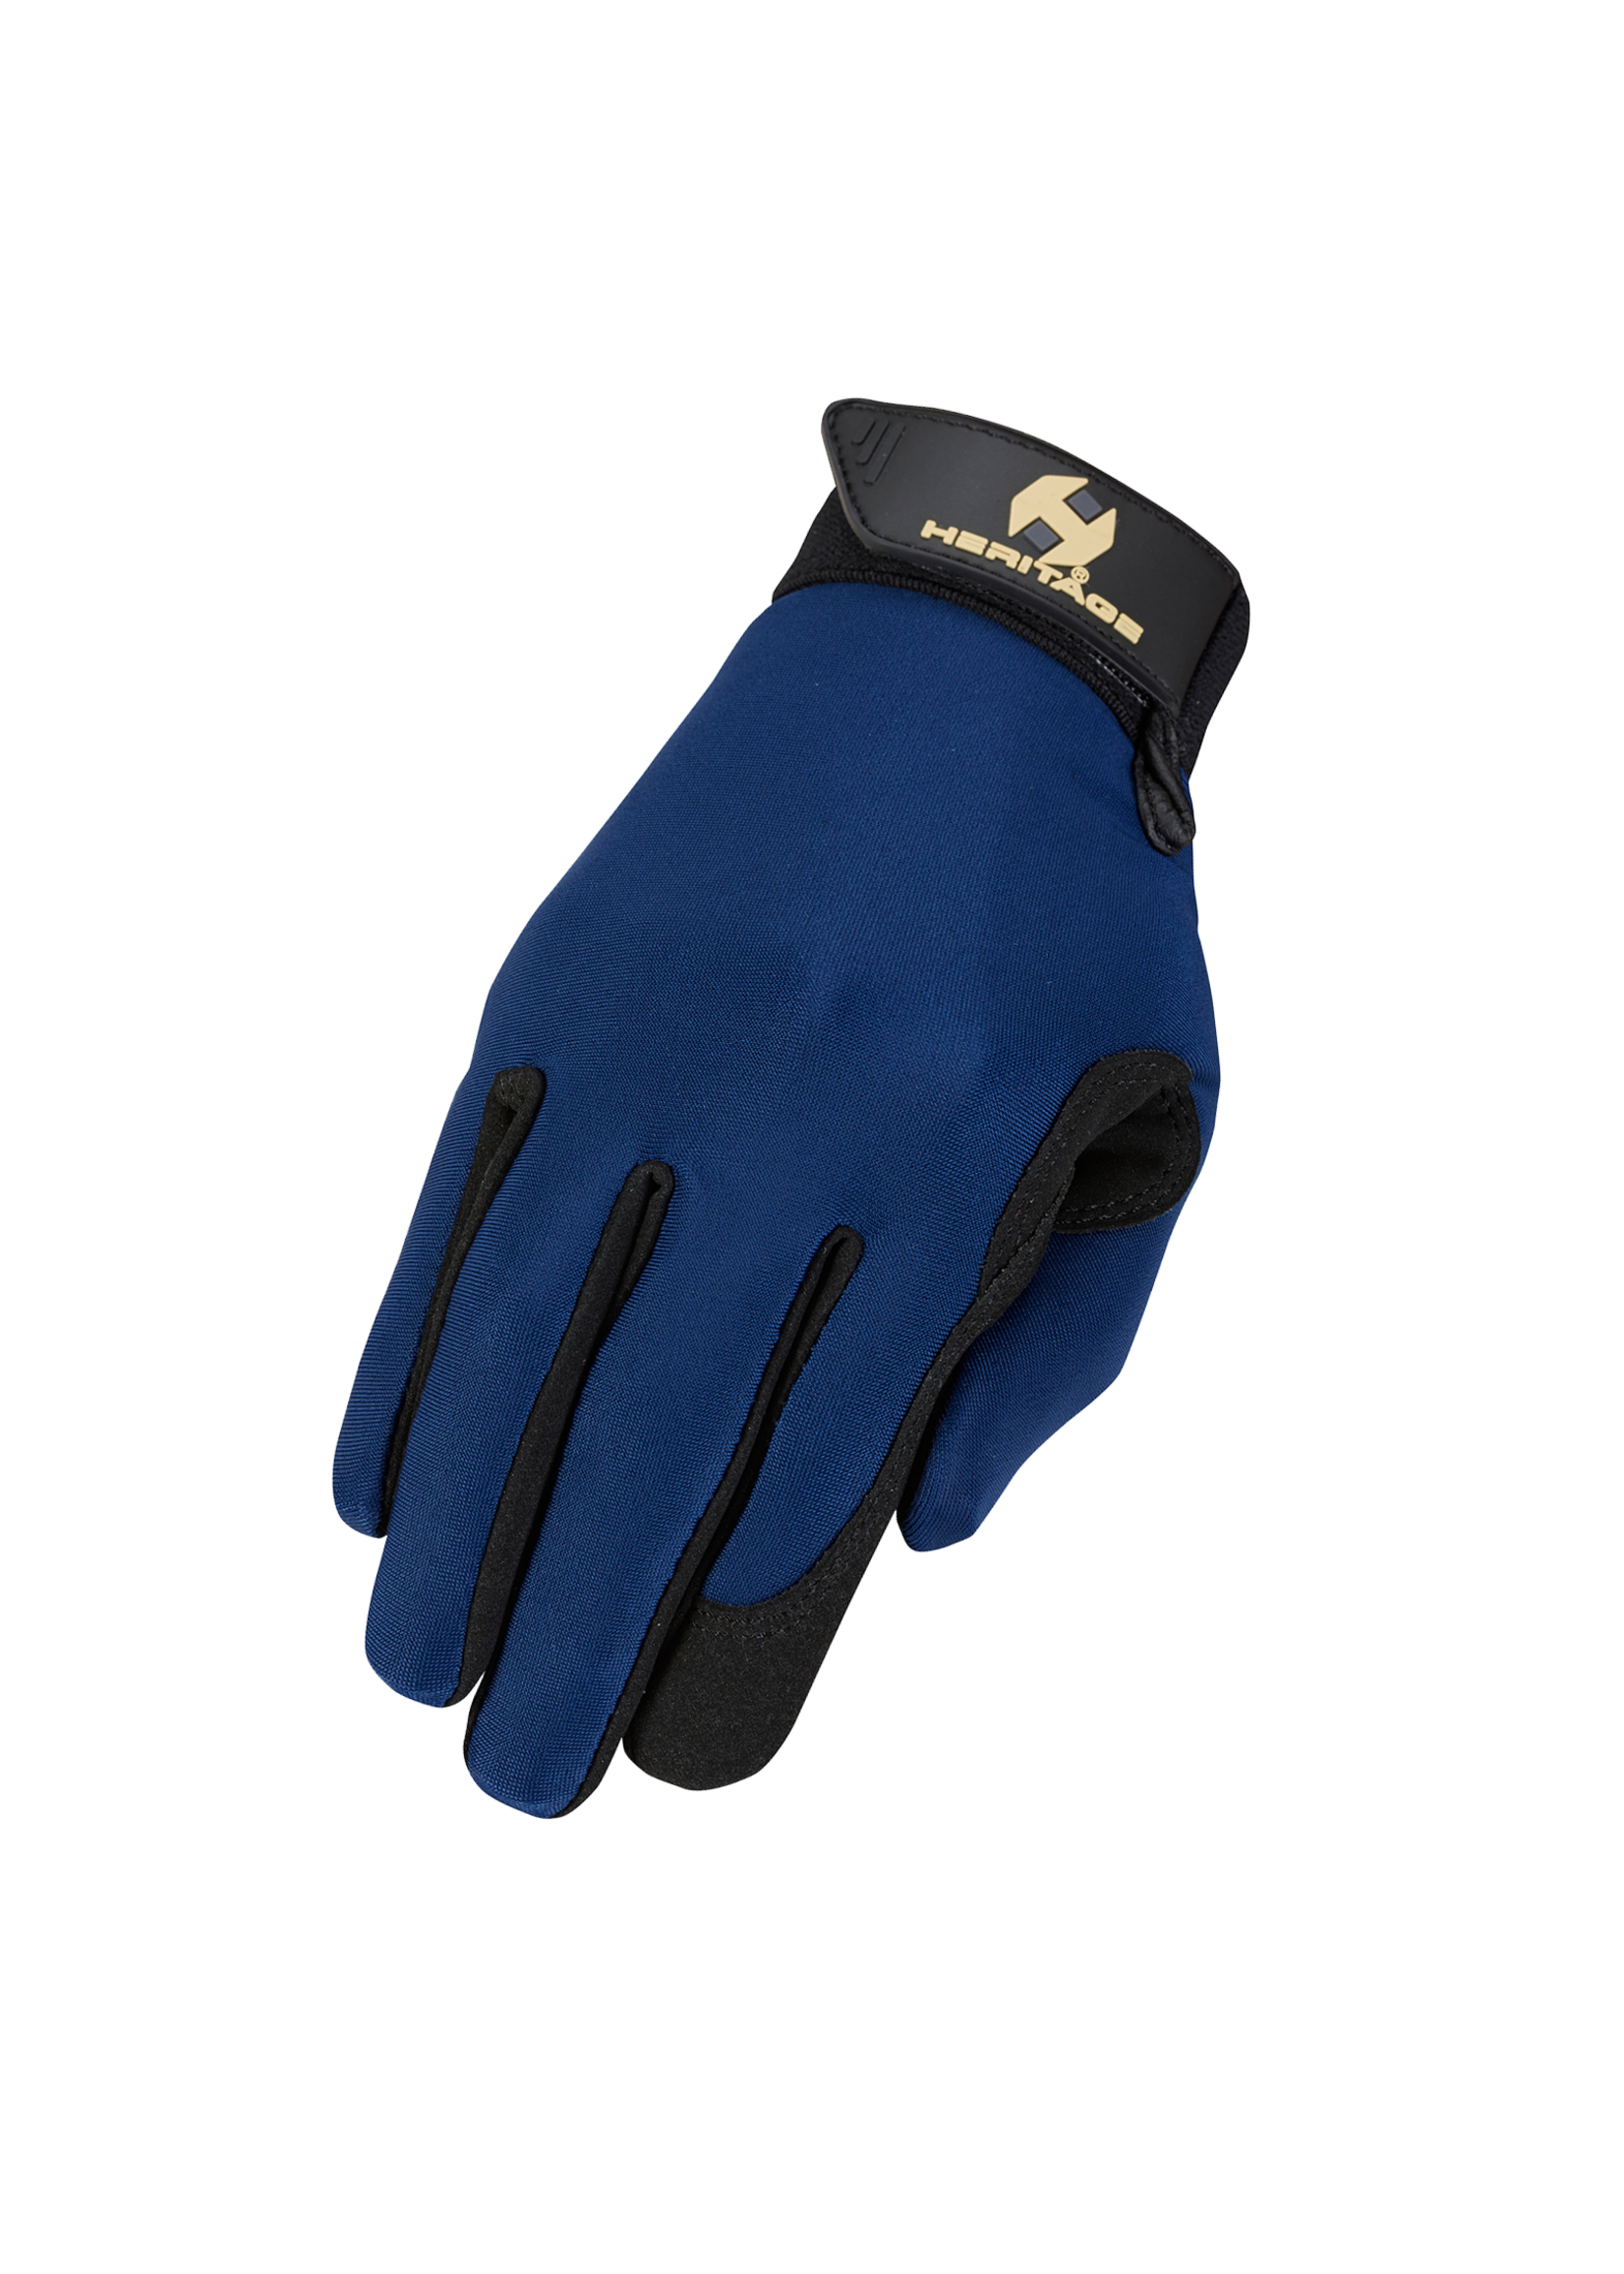 Heritage Products Heritage Performance Glove